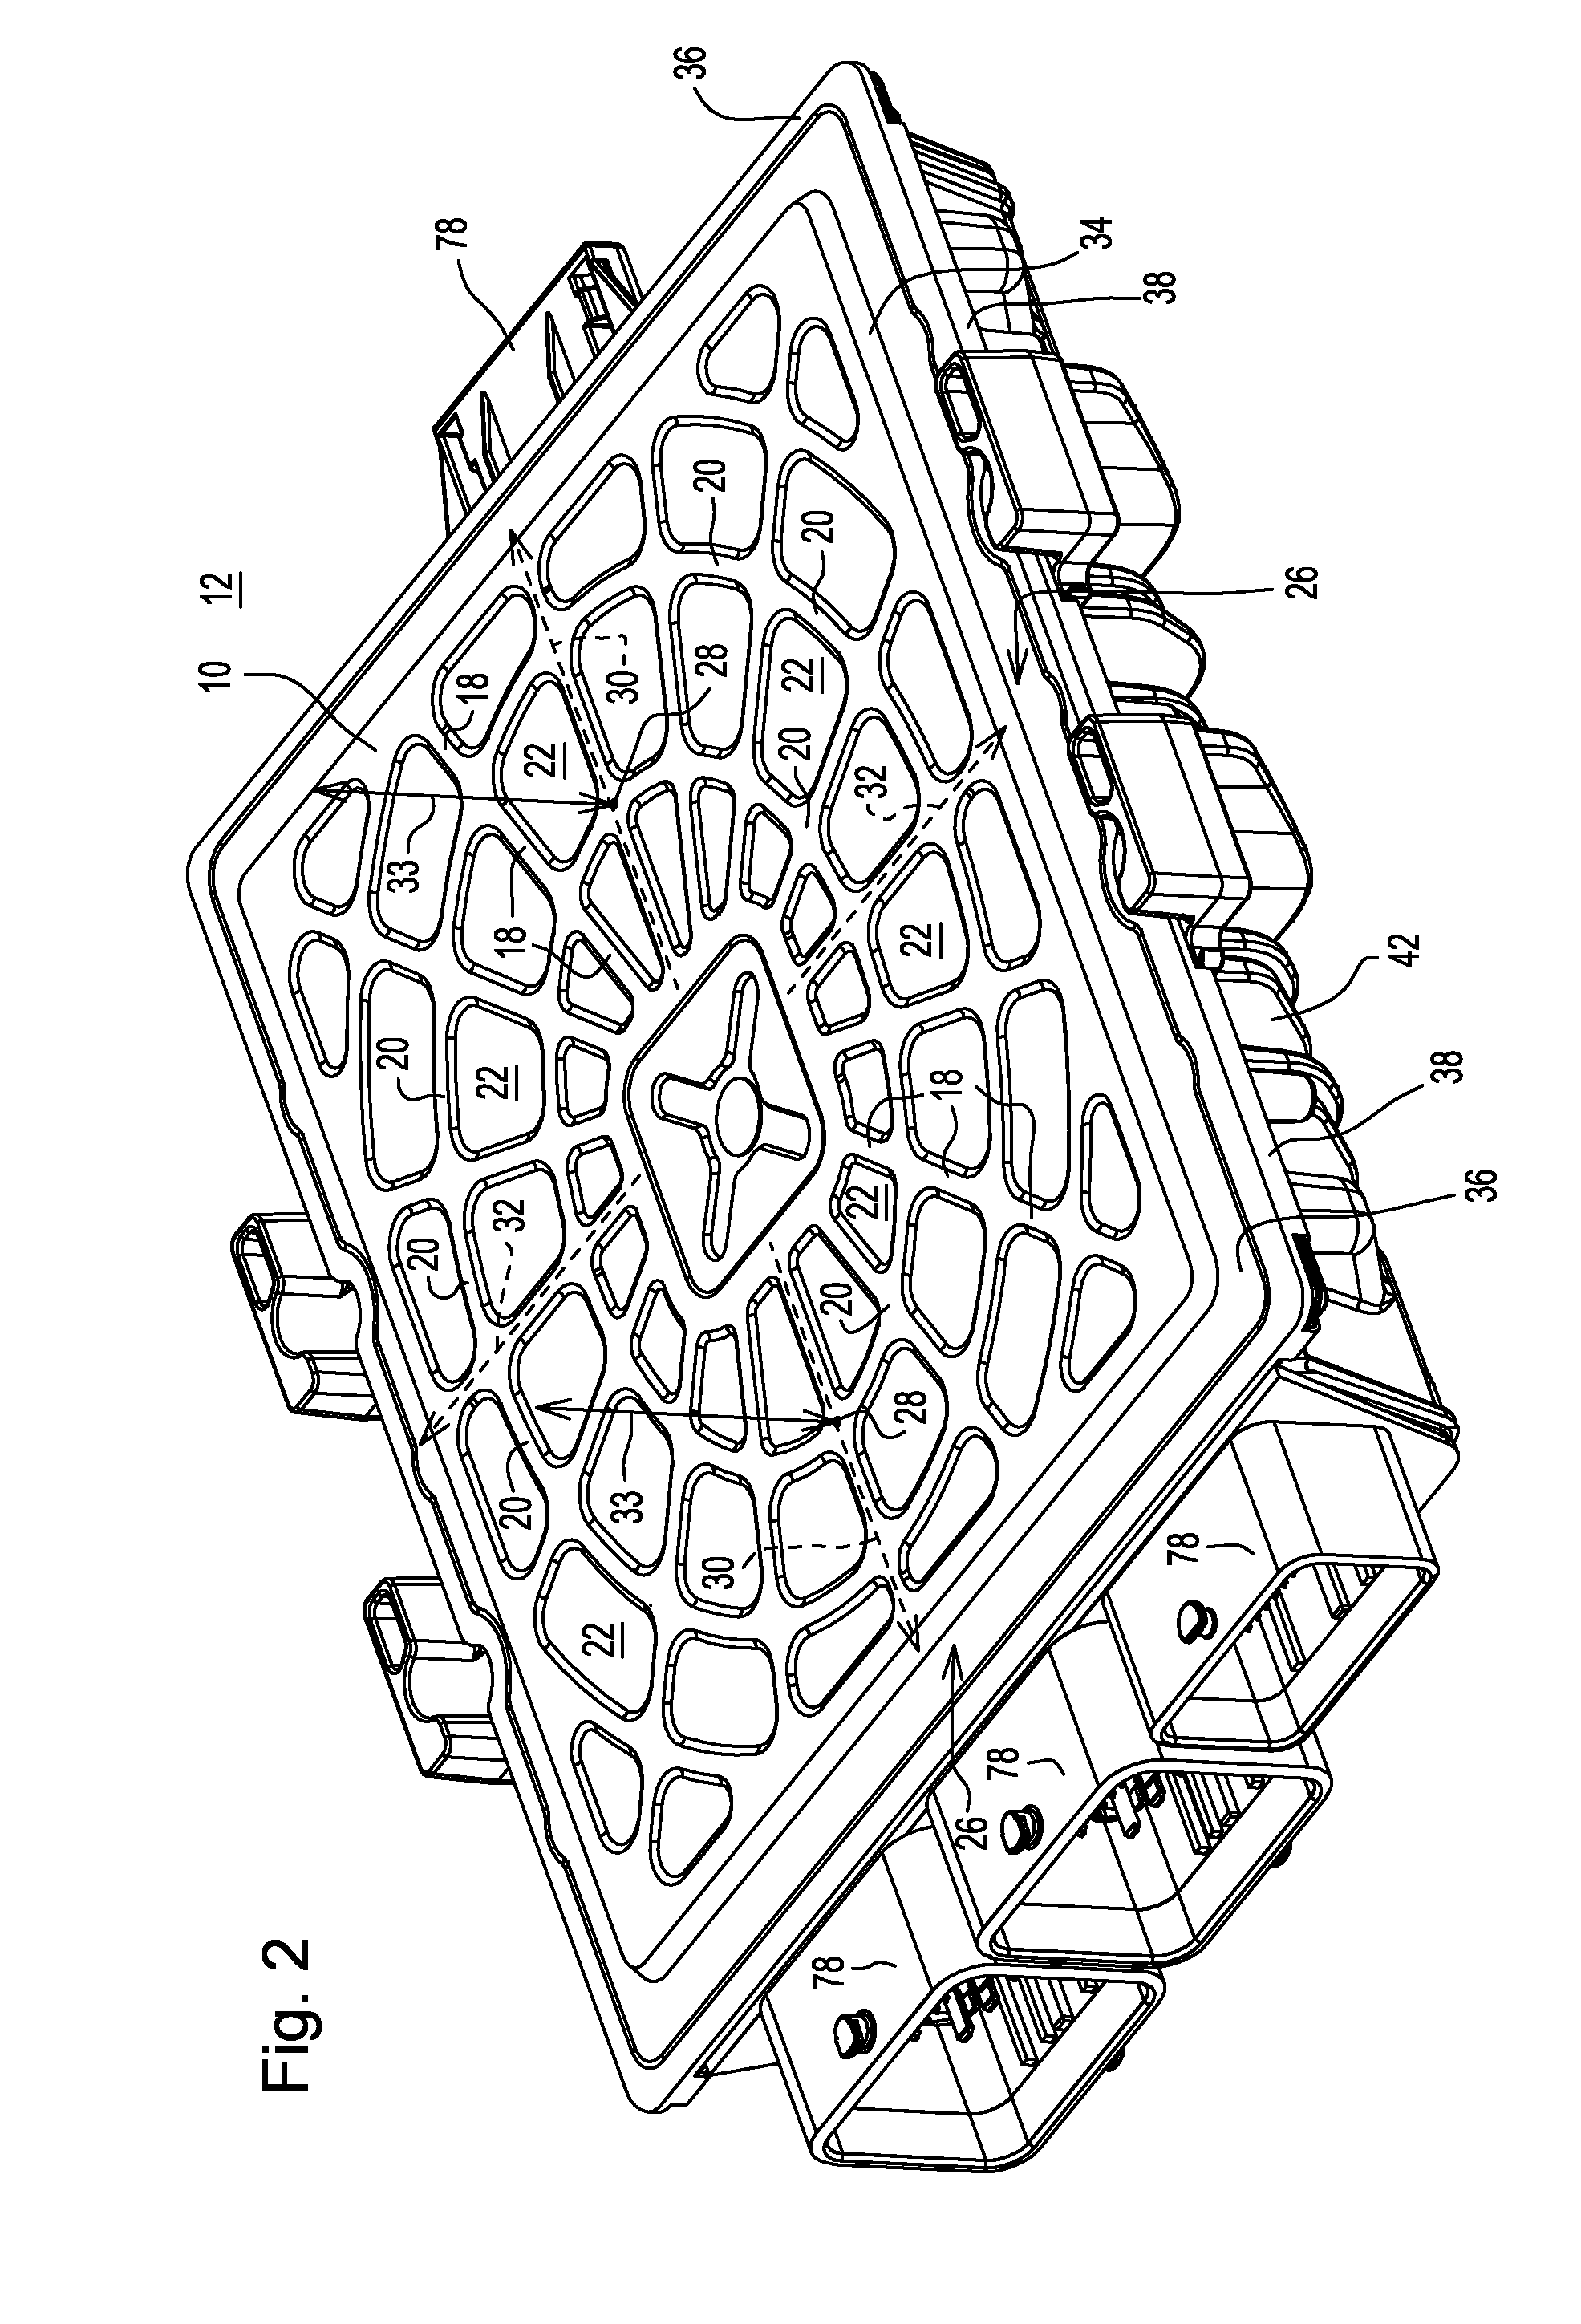 Cover with improved vibrational characteristics for an electronic device